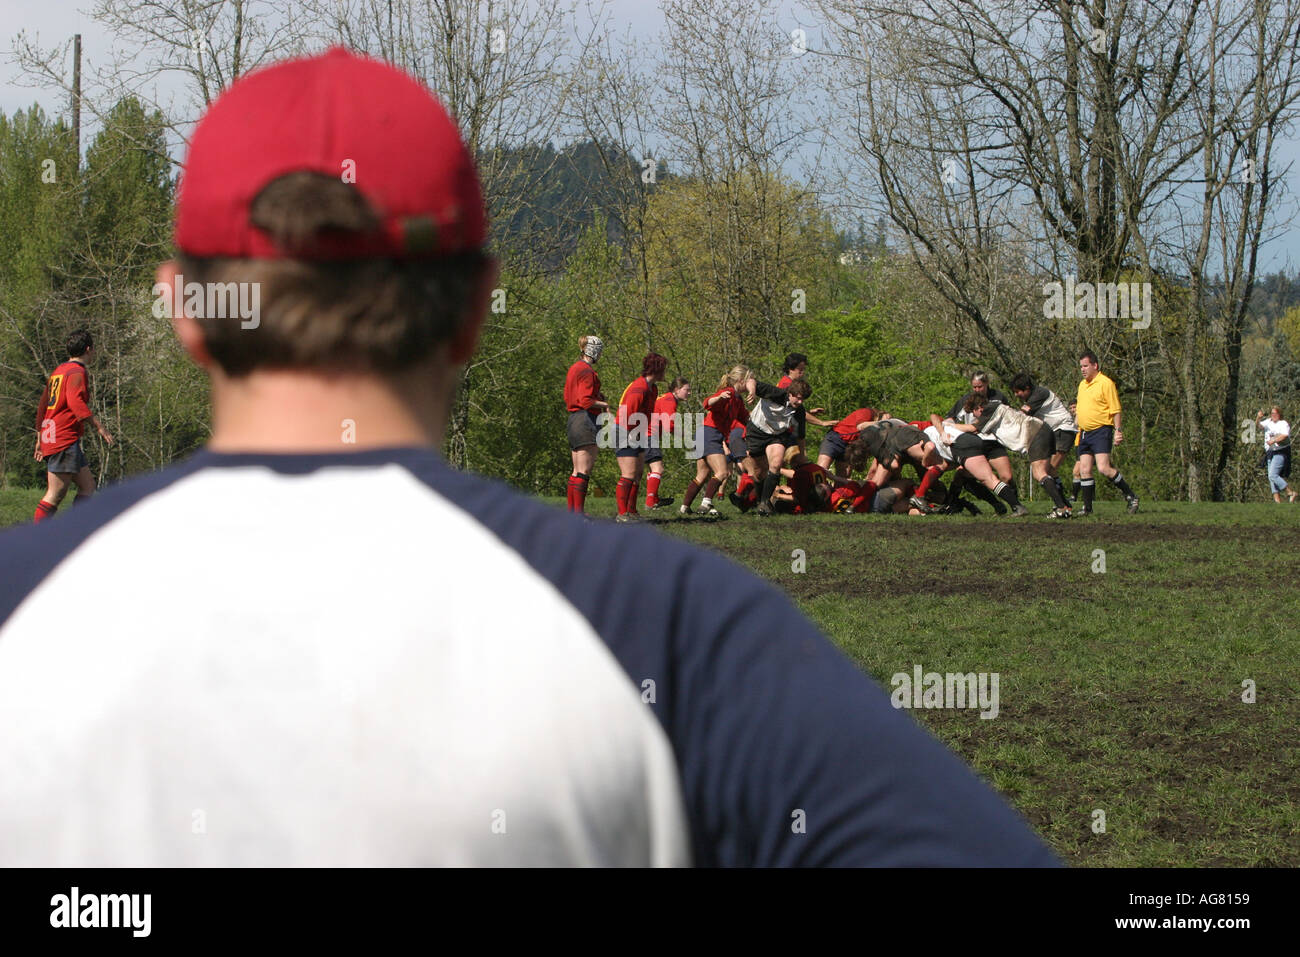 A coach watches a women s rugby game in action during the scrum as players fight for the ball at a game in Oregon Stock Photo